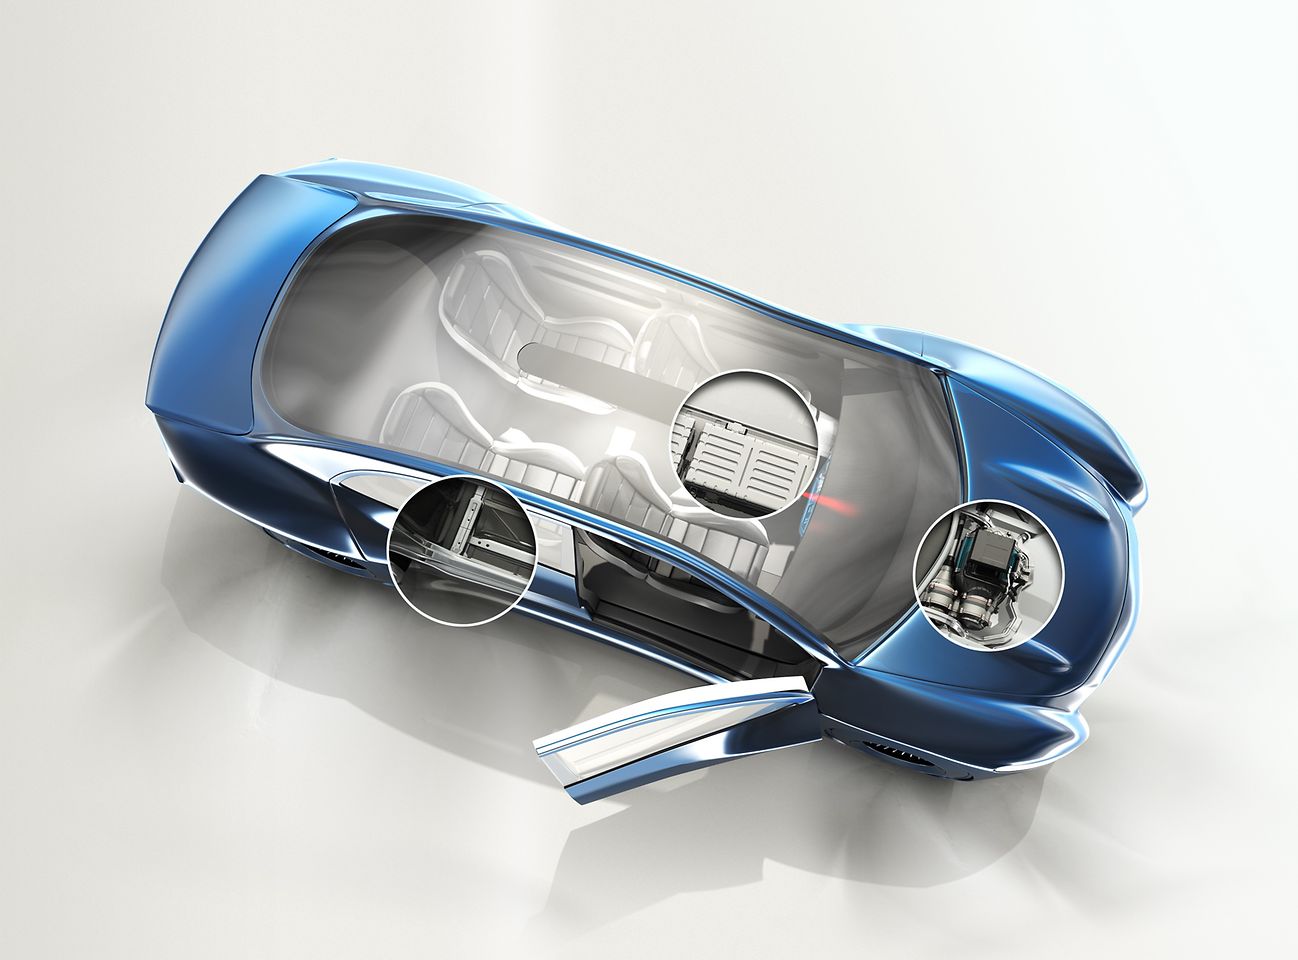 Adhesive solutions from Henkel drive the transfformation in the automotive industry.